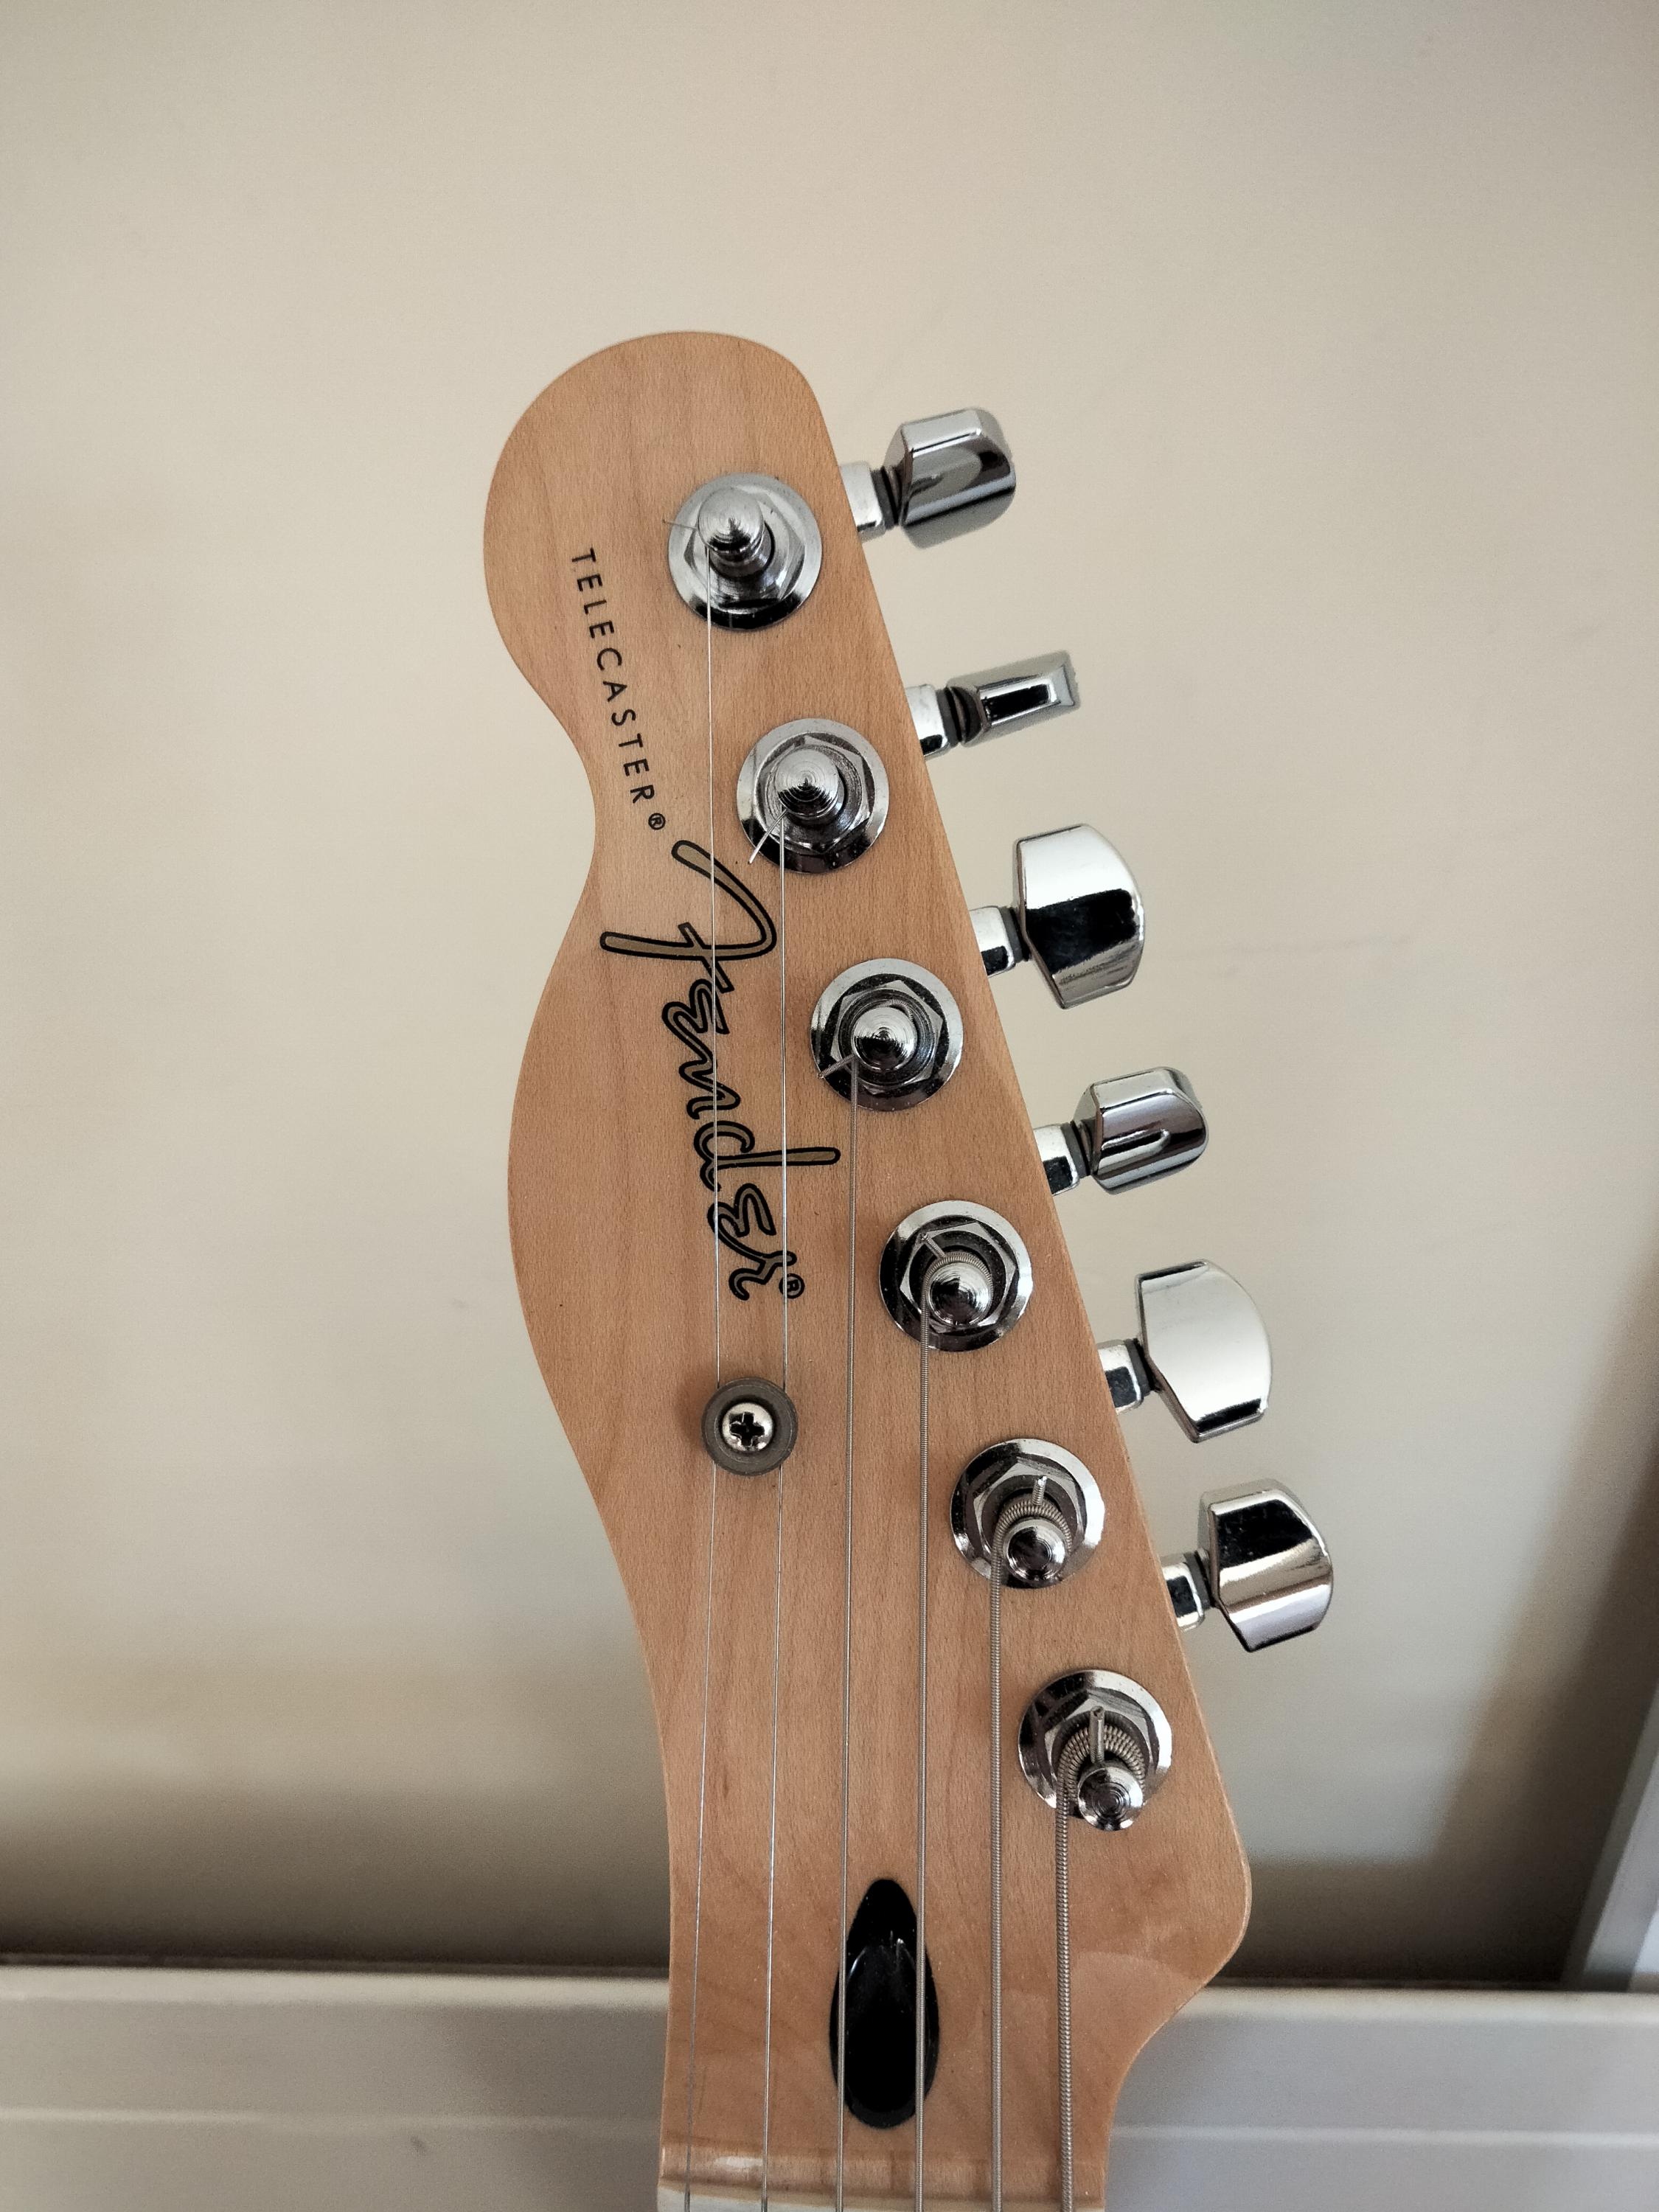 Telecaster Love Thread, No Archtops Allowed-img20220331152954-jpg